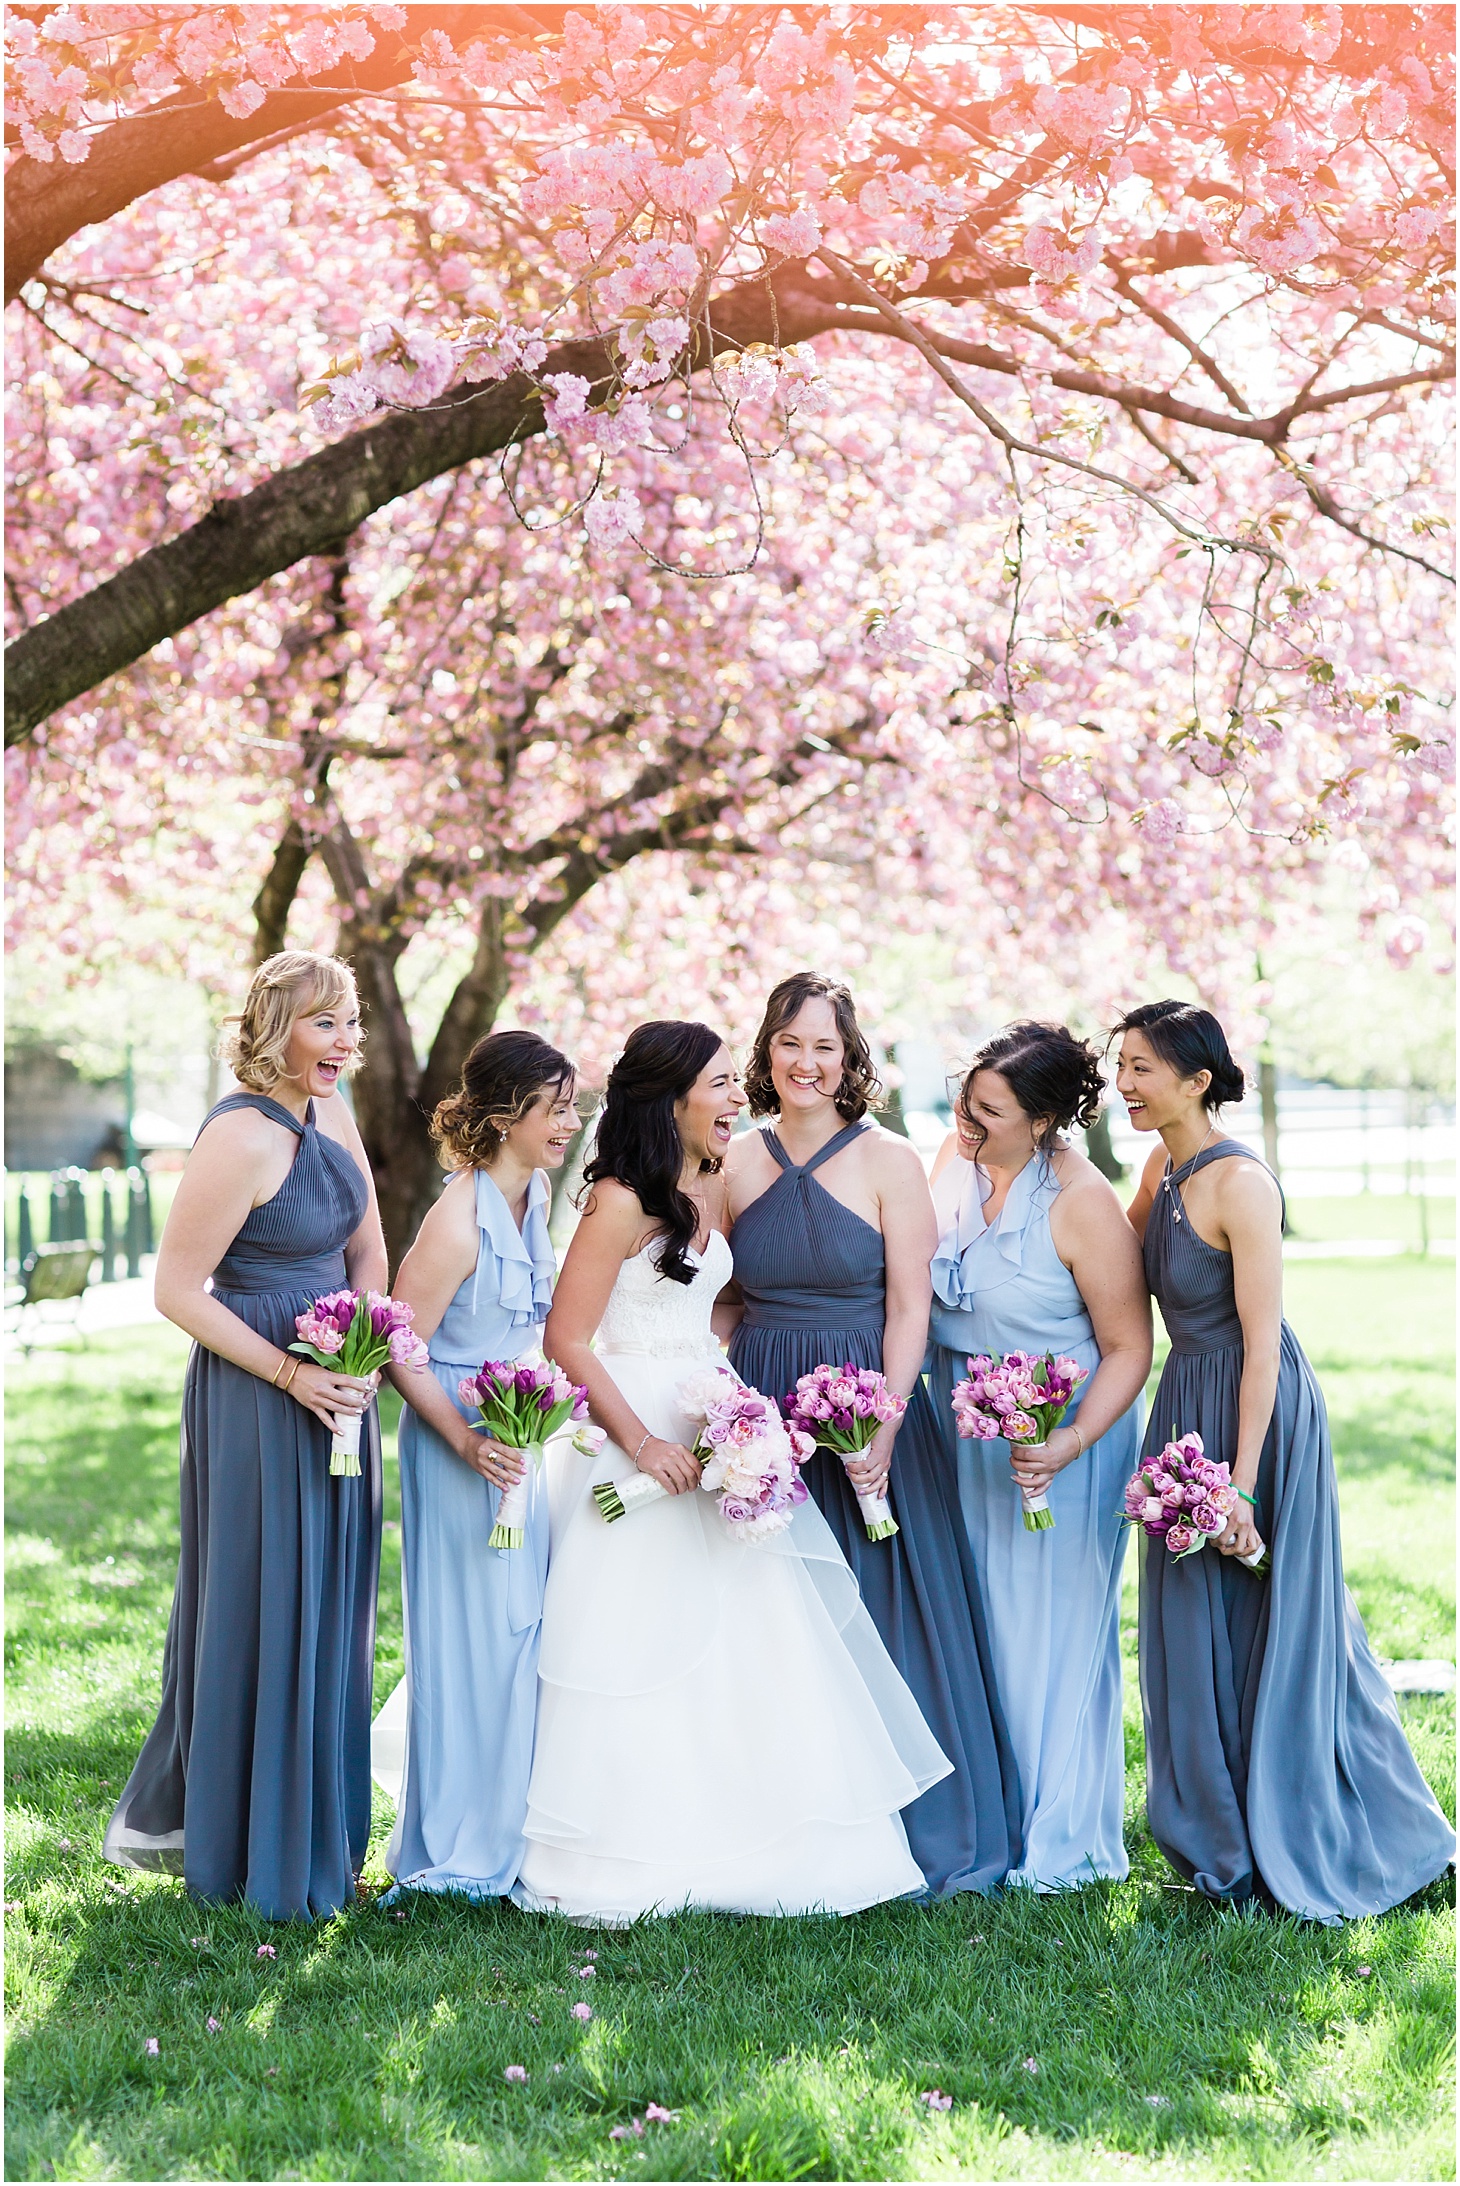 Wedding Party Portraits Under Cherry Trees, Museum-Inspired Spring Wedding at National Museum of Women in the Arts, Sarah Bradshaw Photography, DC Wedding Photographer